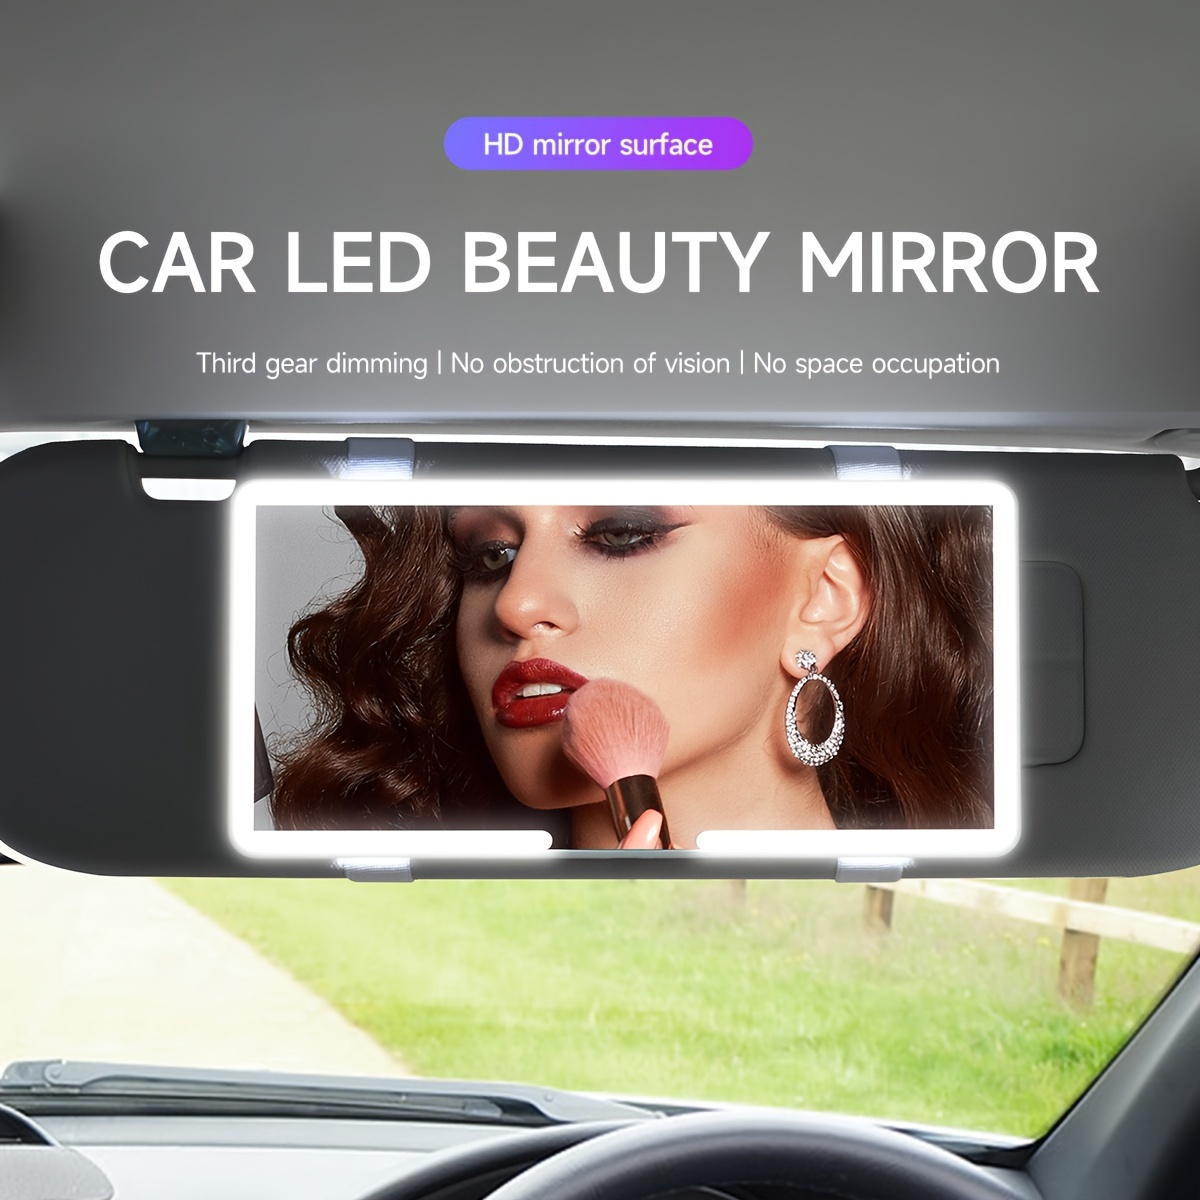 

Upgraded Ultra-thin Version Car Visor Vanity Mirror Rechargeable With 3 Light Modes & Led For Car Truck Suv Rear View With Dimmable Touch Screen, Car Mirror As A Gifts For Women